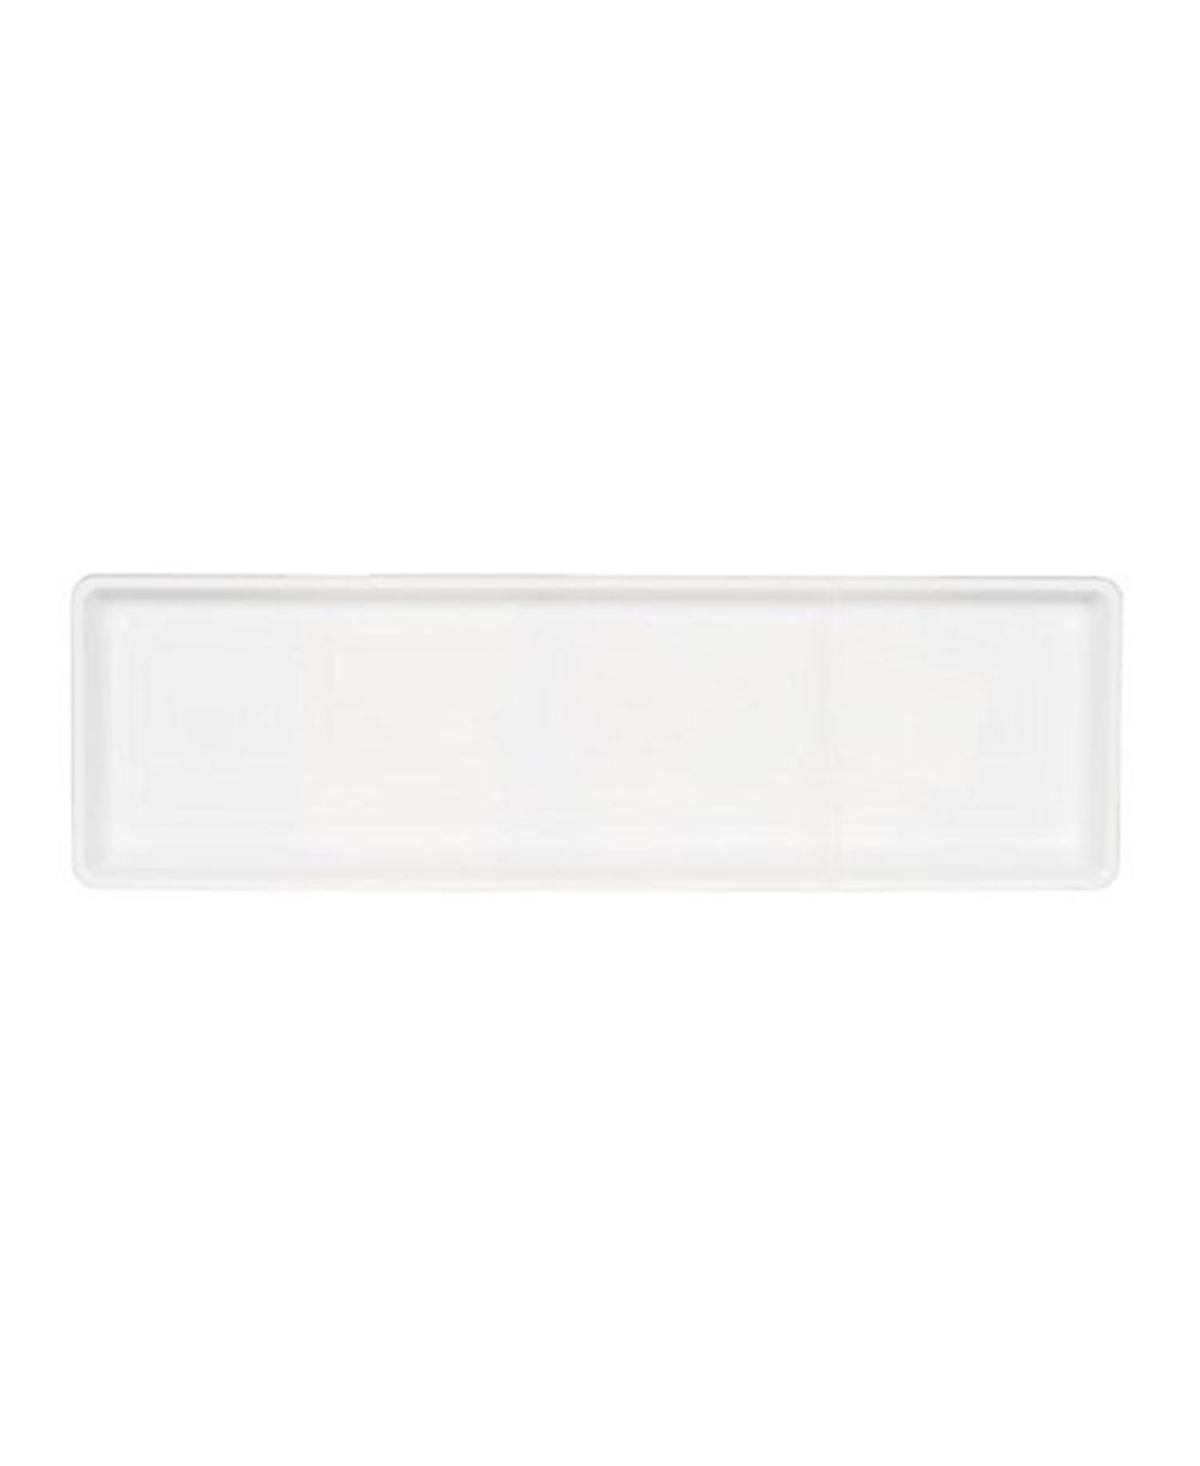 Countryside Flower Box Tray, White, 24-Inch - White